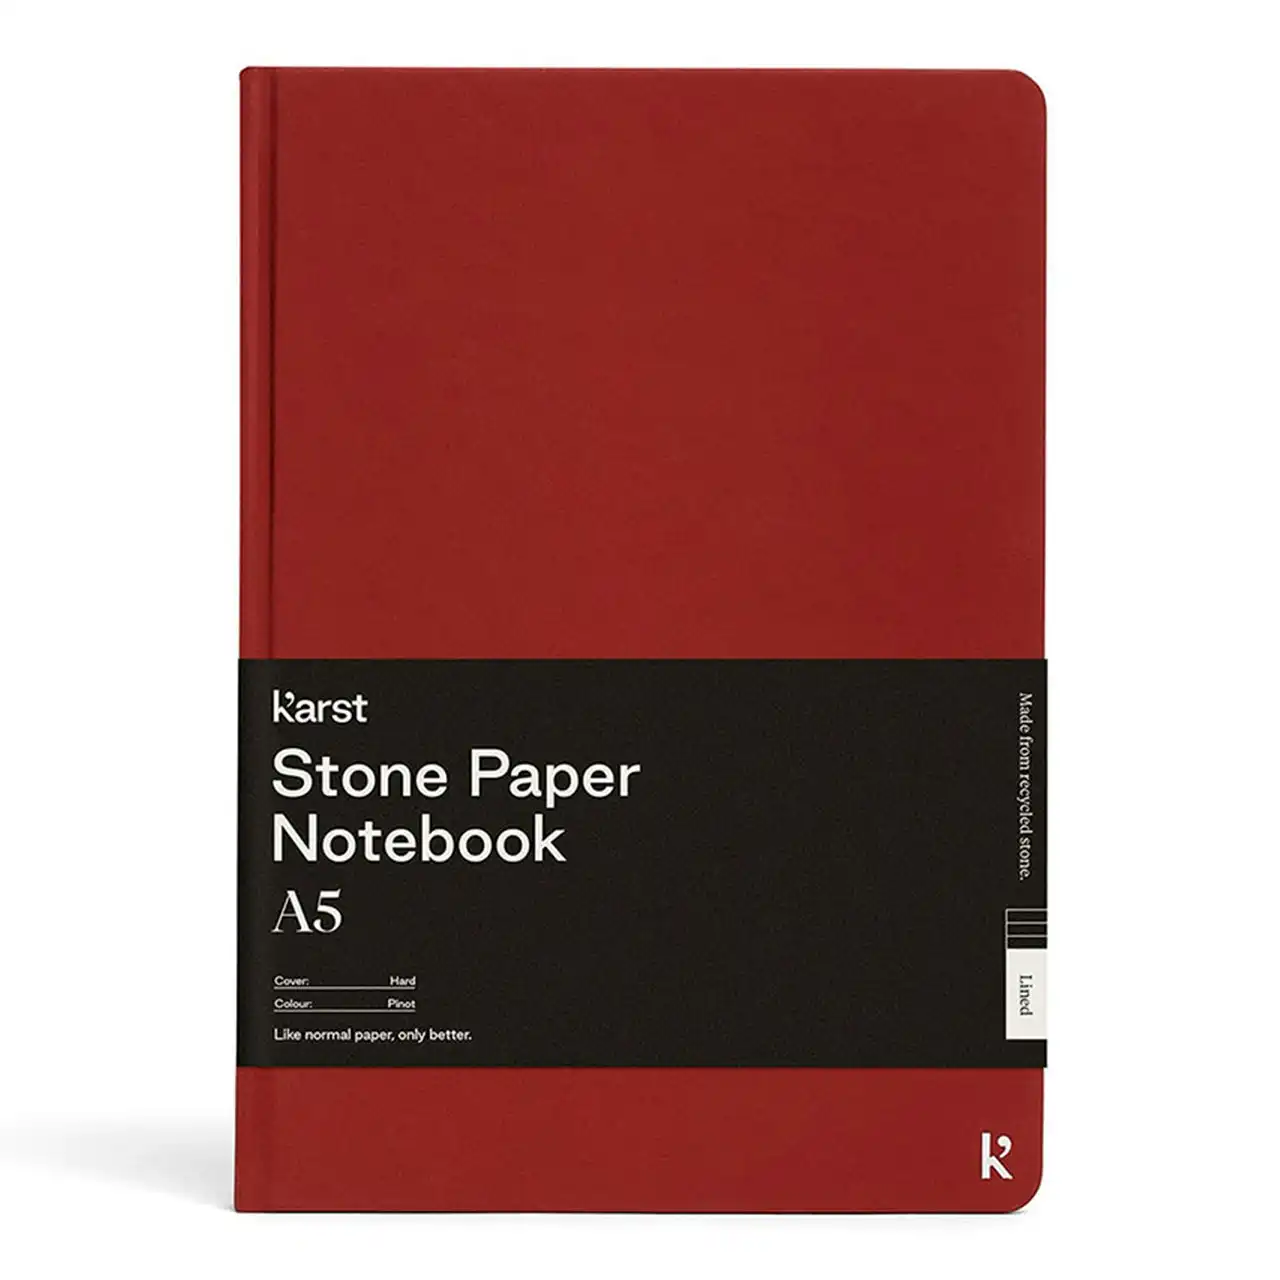 Karst Plain A5 Hard Cover Notebook Writing 100gsm Paper 144 Pages Journal Pinot